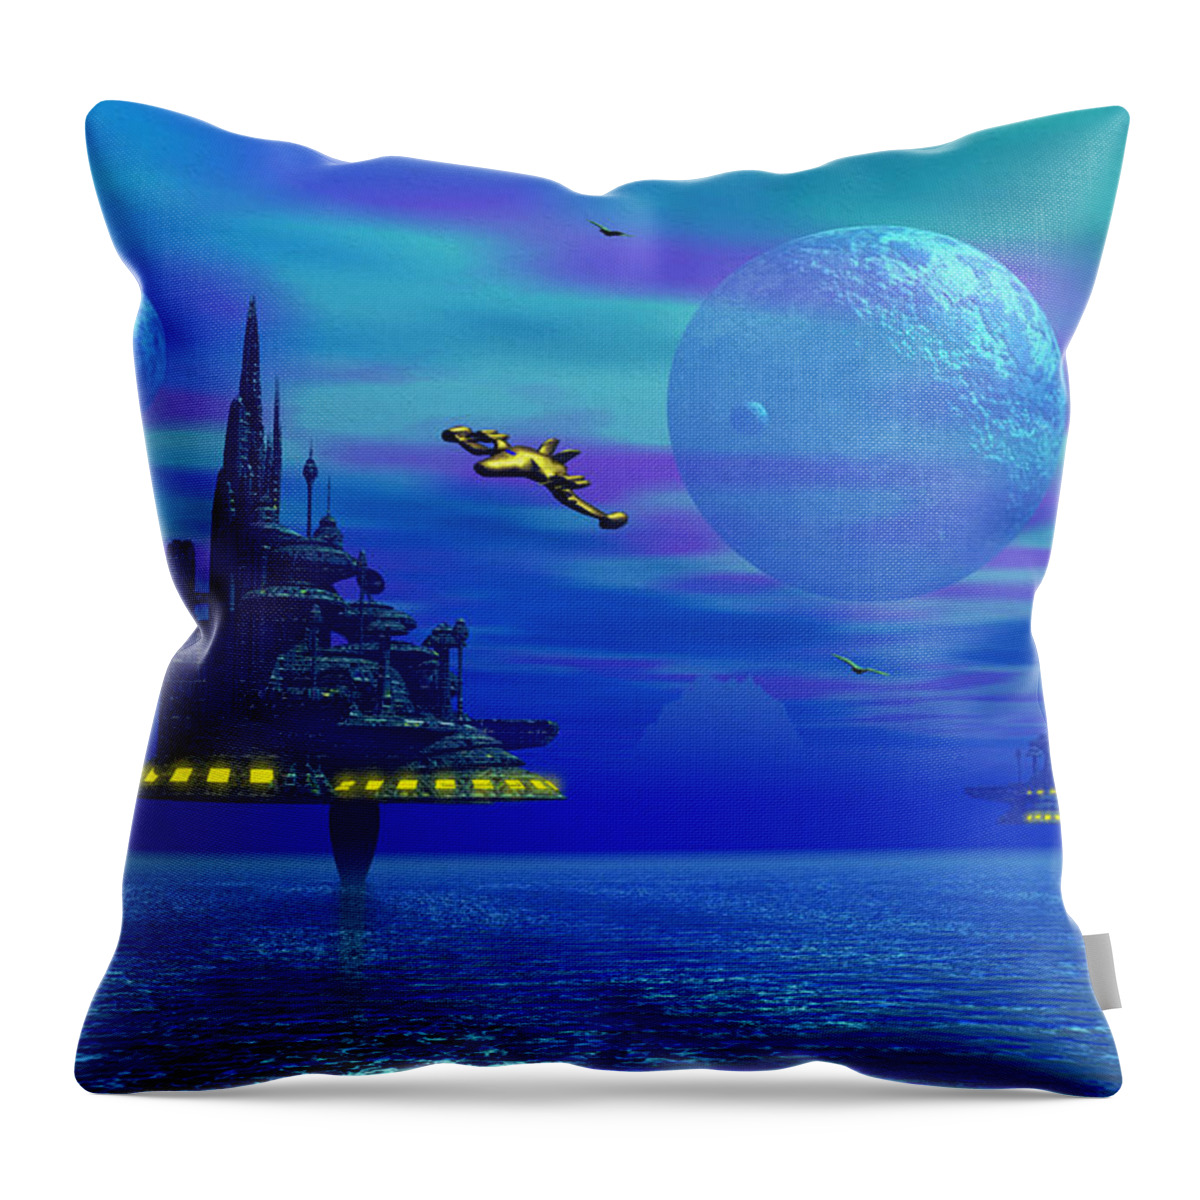 Night Throw Pillow featuring the photograph Glurk Z by Mark Blauhoefer